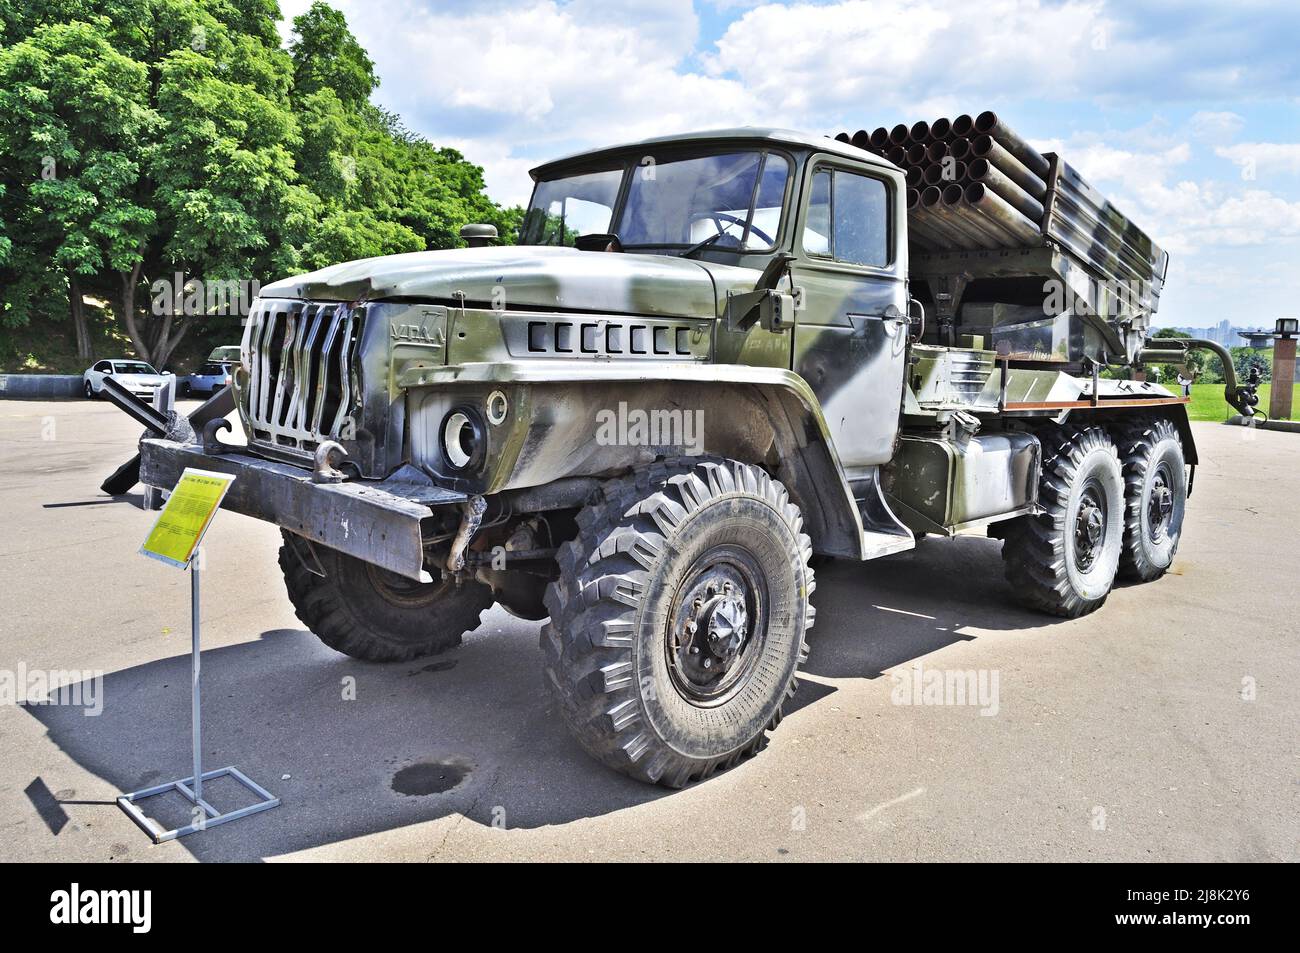 Russian BM-21 Grad - truck-mounted multiple rocket launcher - exhibited in the Museum of War. Vehicle seized during civil war in Donbass on June 2014 Stock Photo